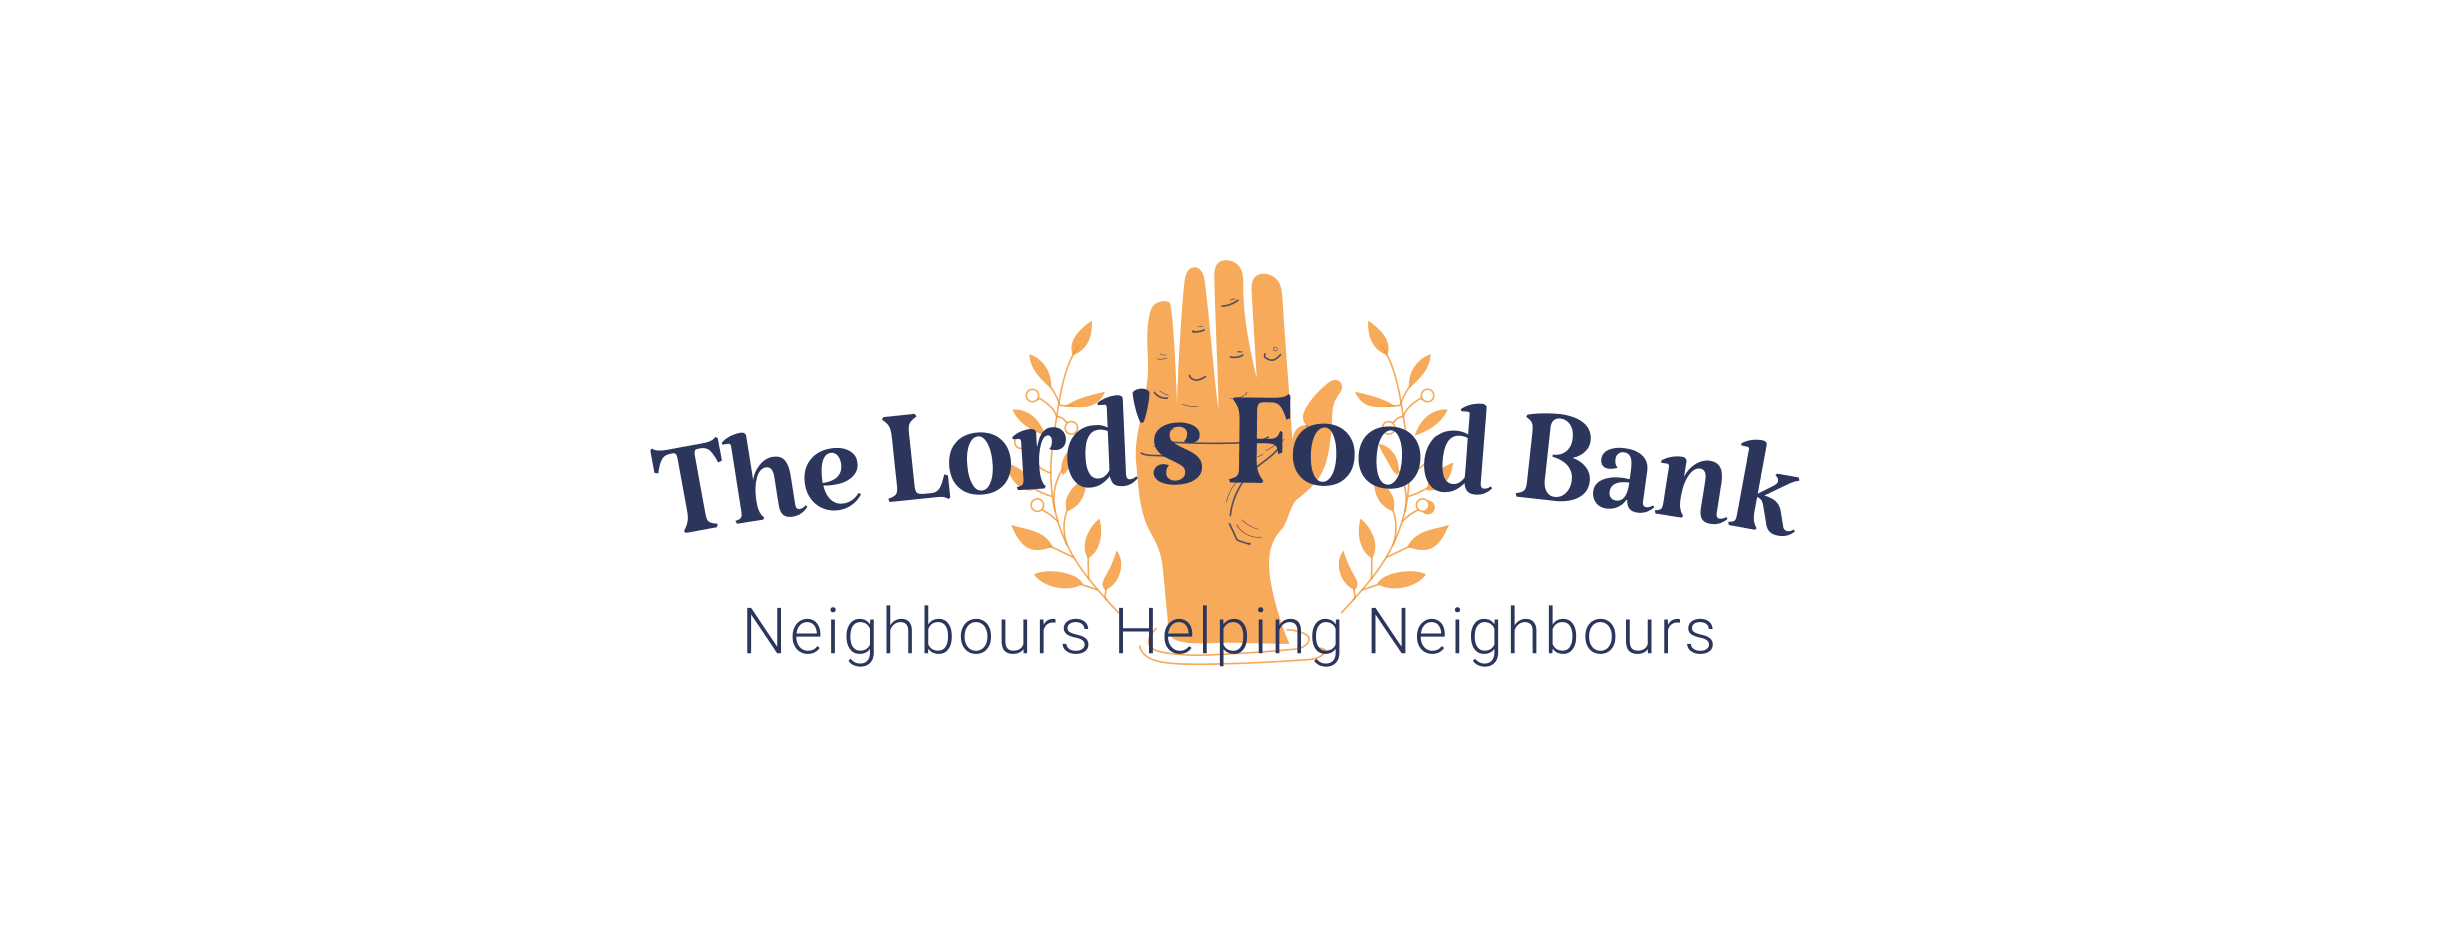 The Lord's Food Bank logo